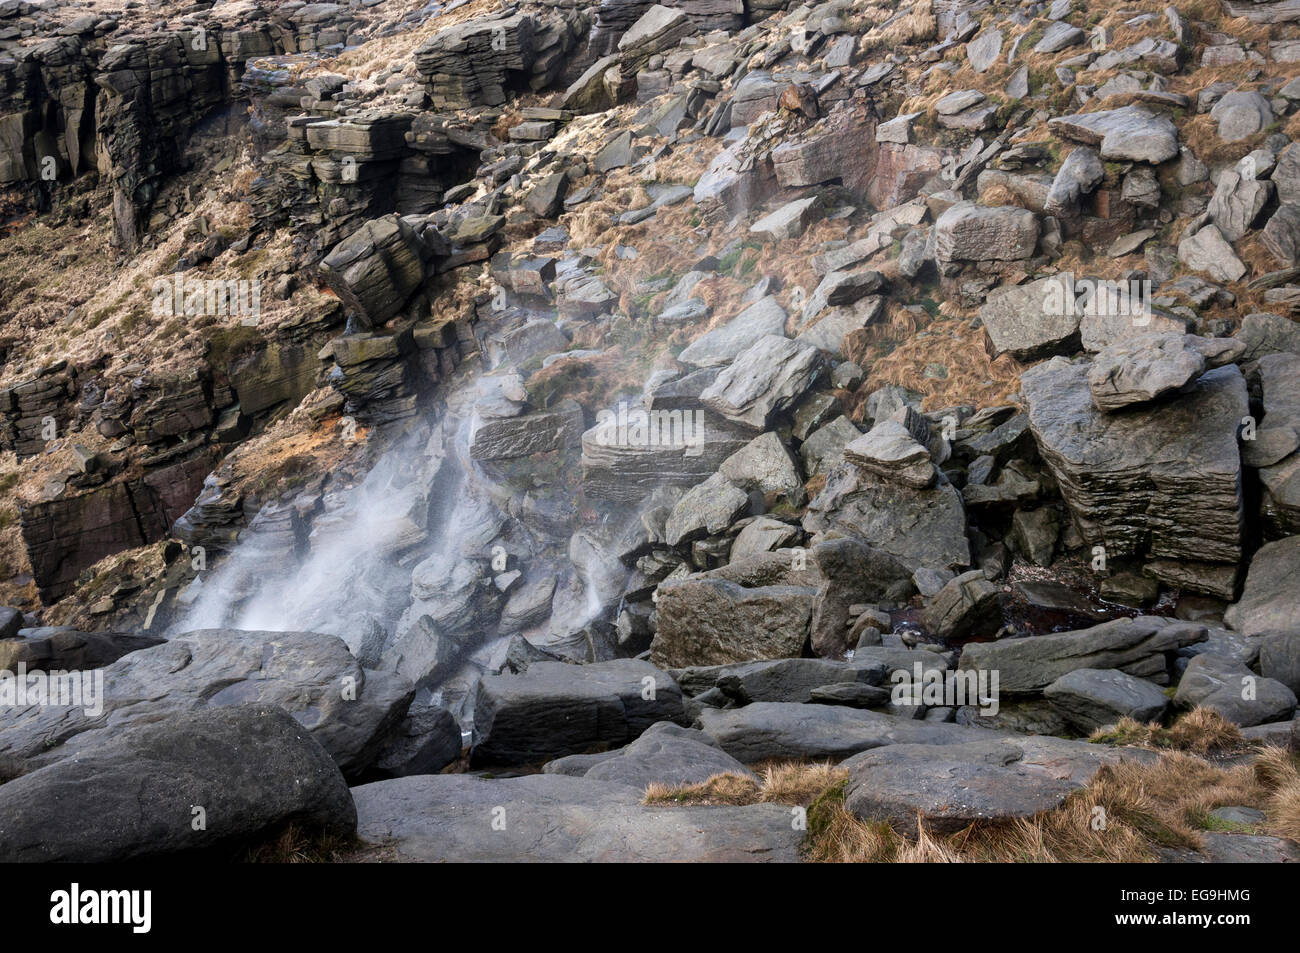 Kinder downfall on a windy day with water being blown up over the rocks. Kinder Scout in the High Peak. Stock Photo